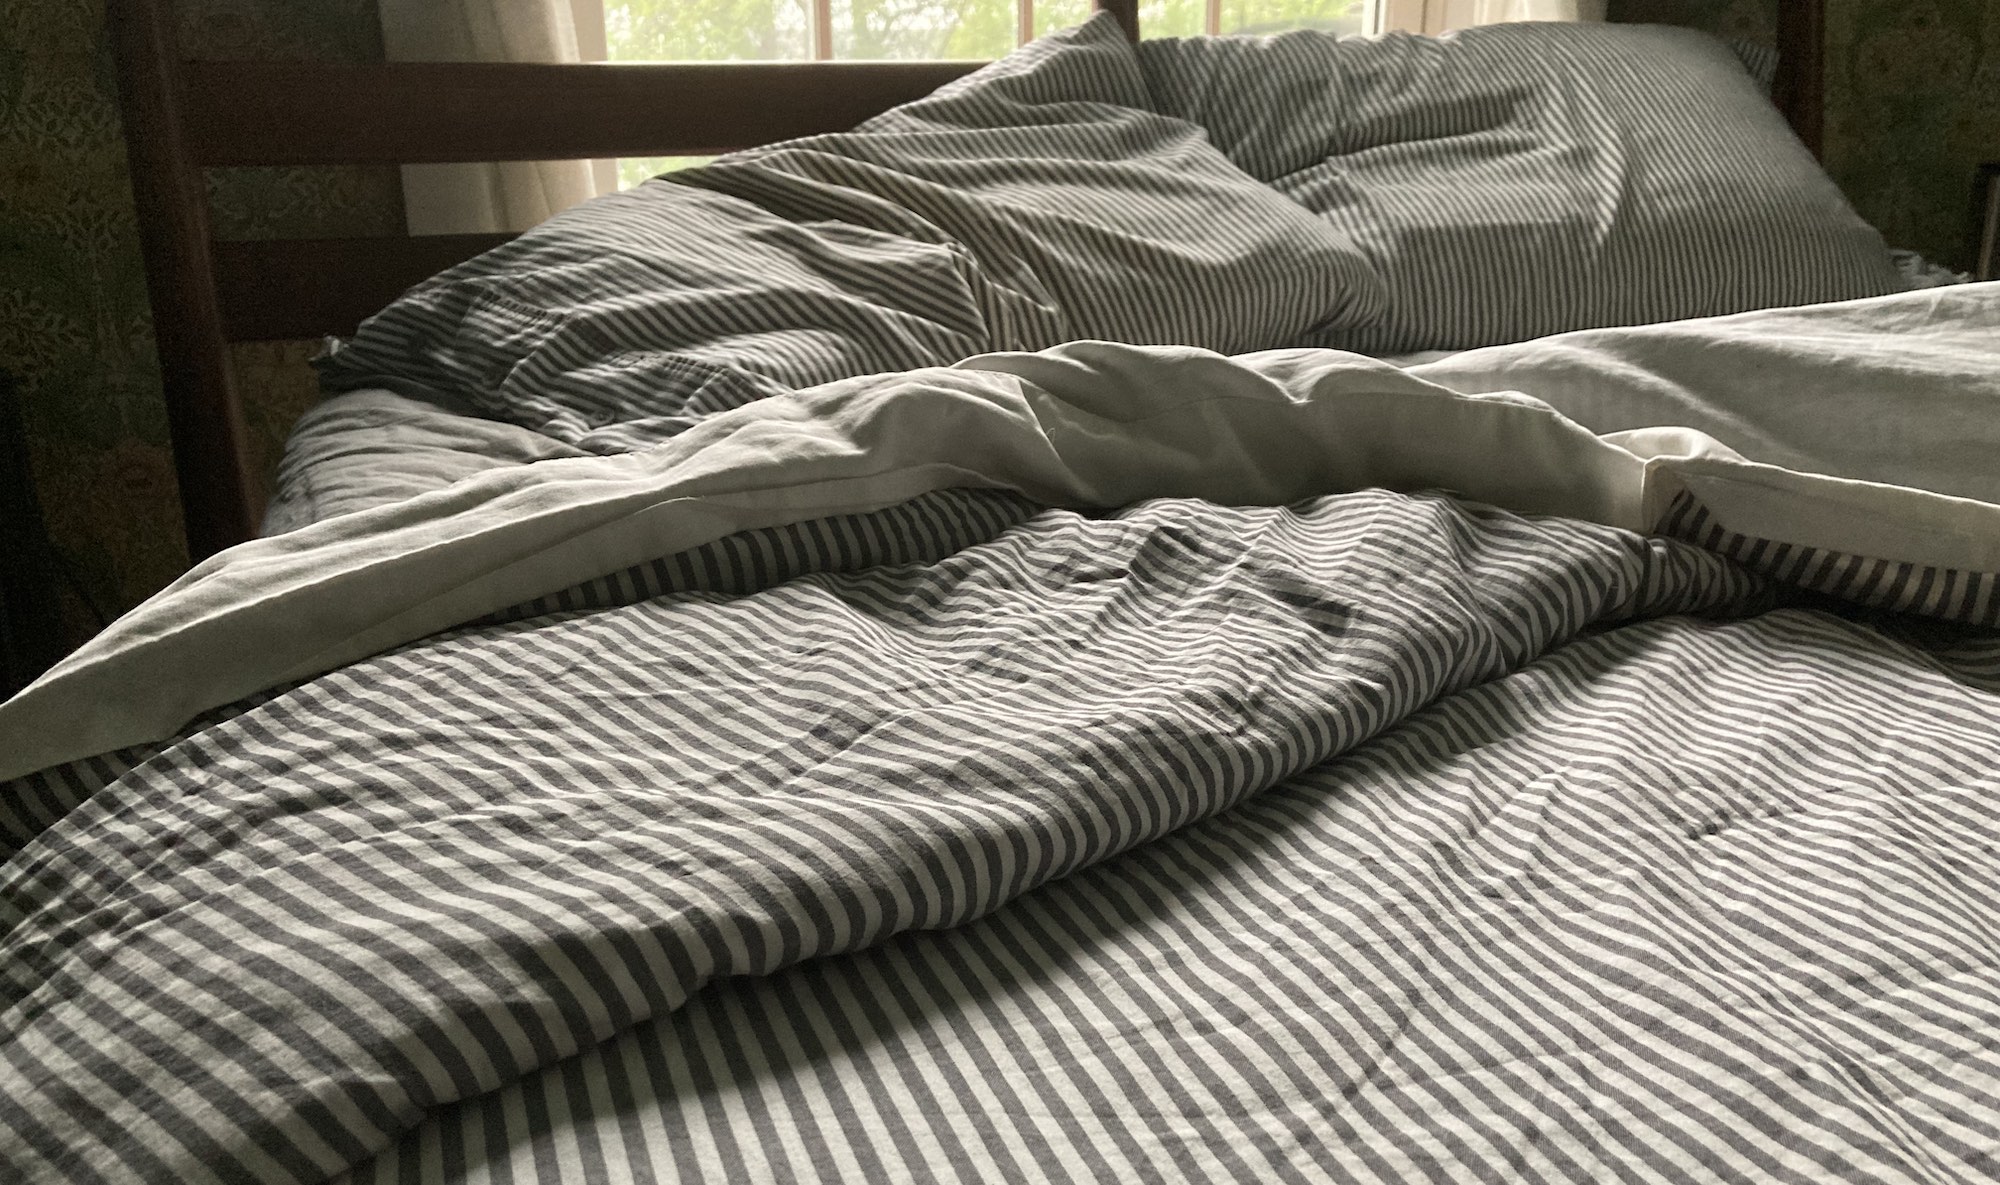 Bed with sheets